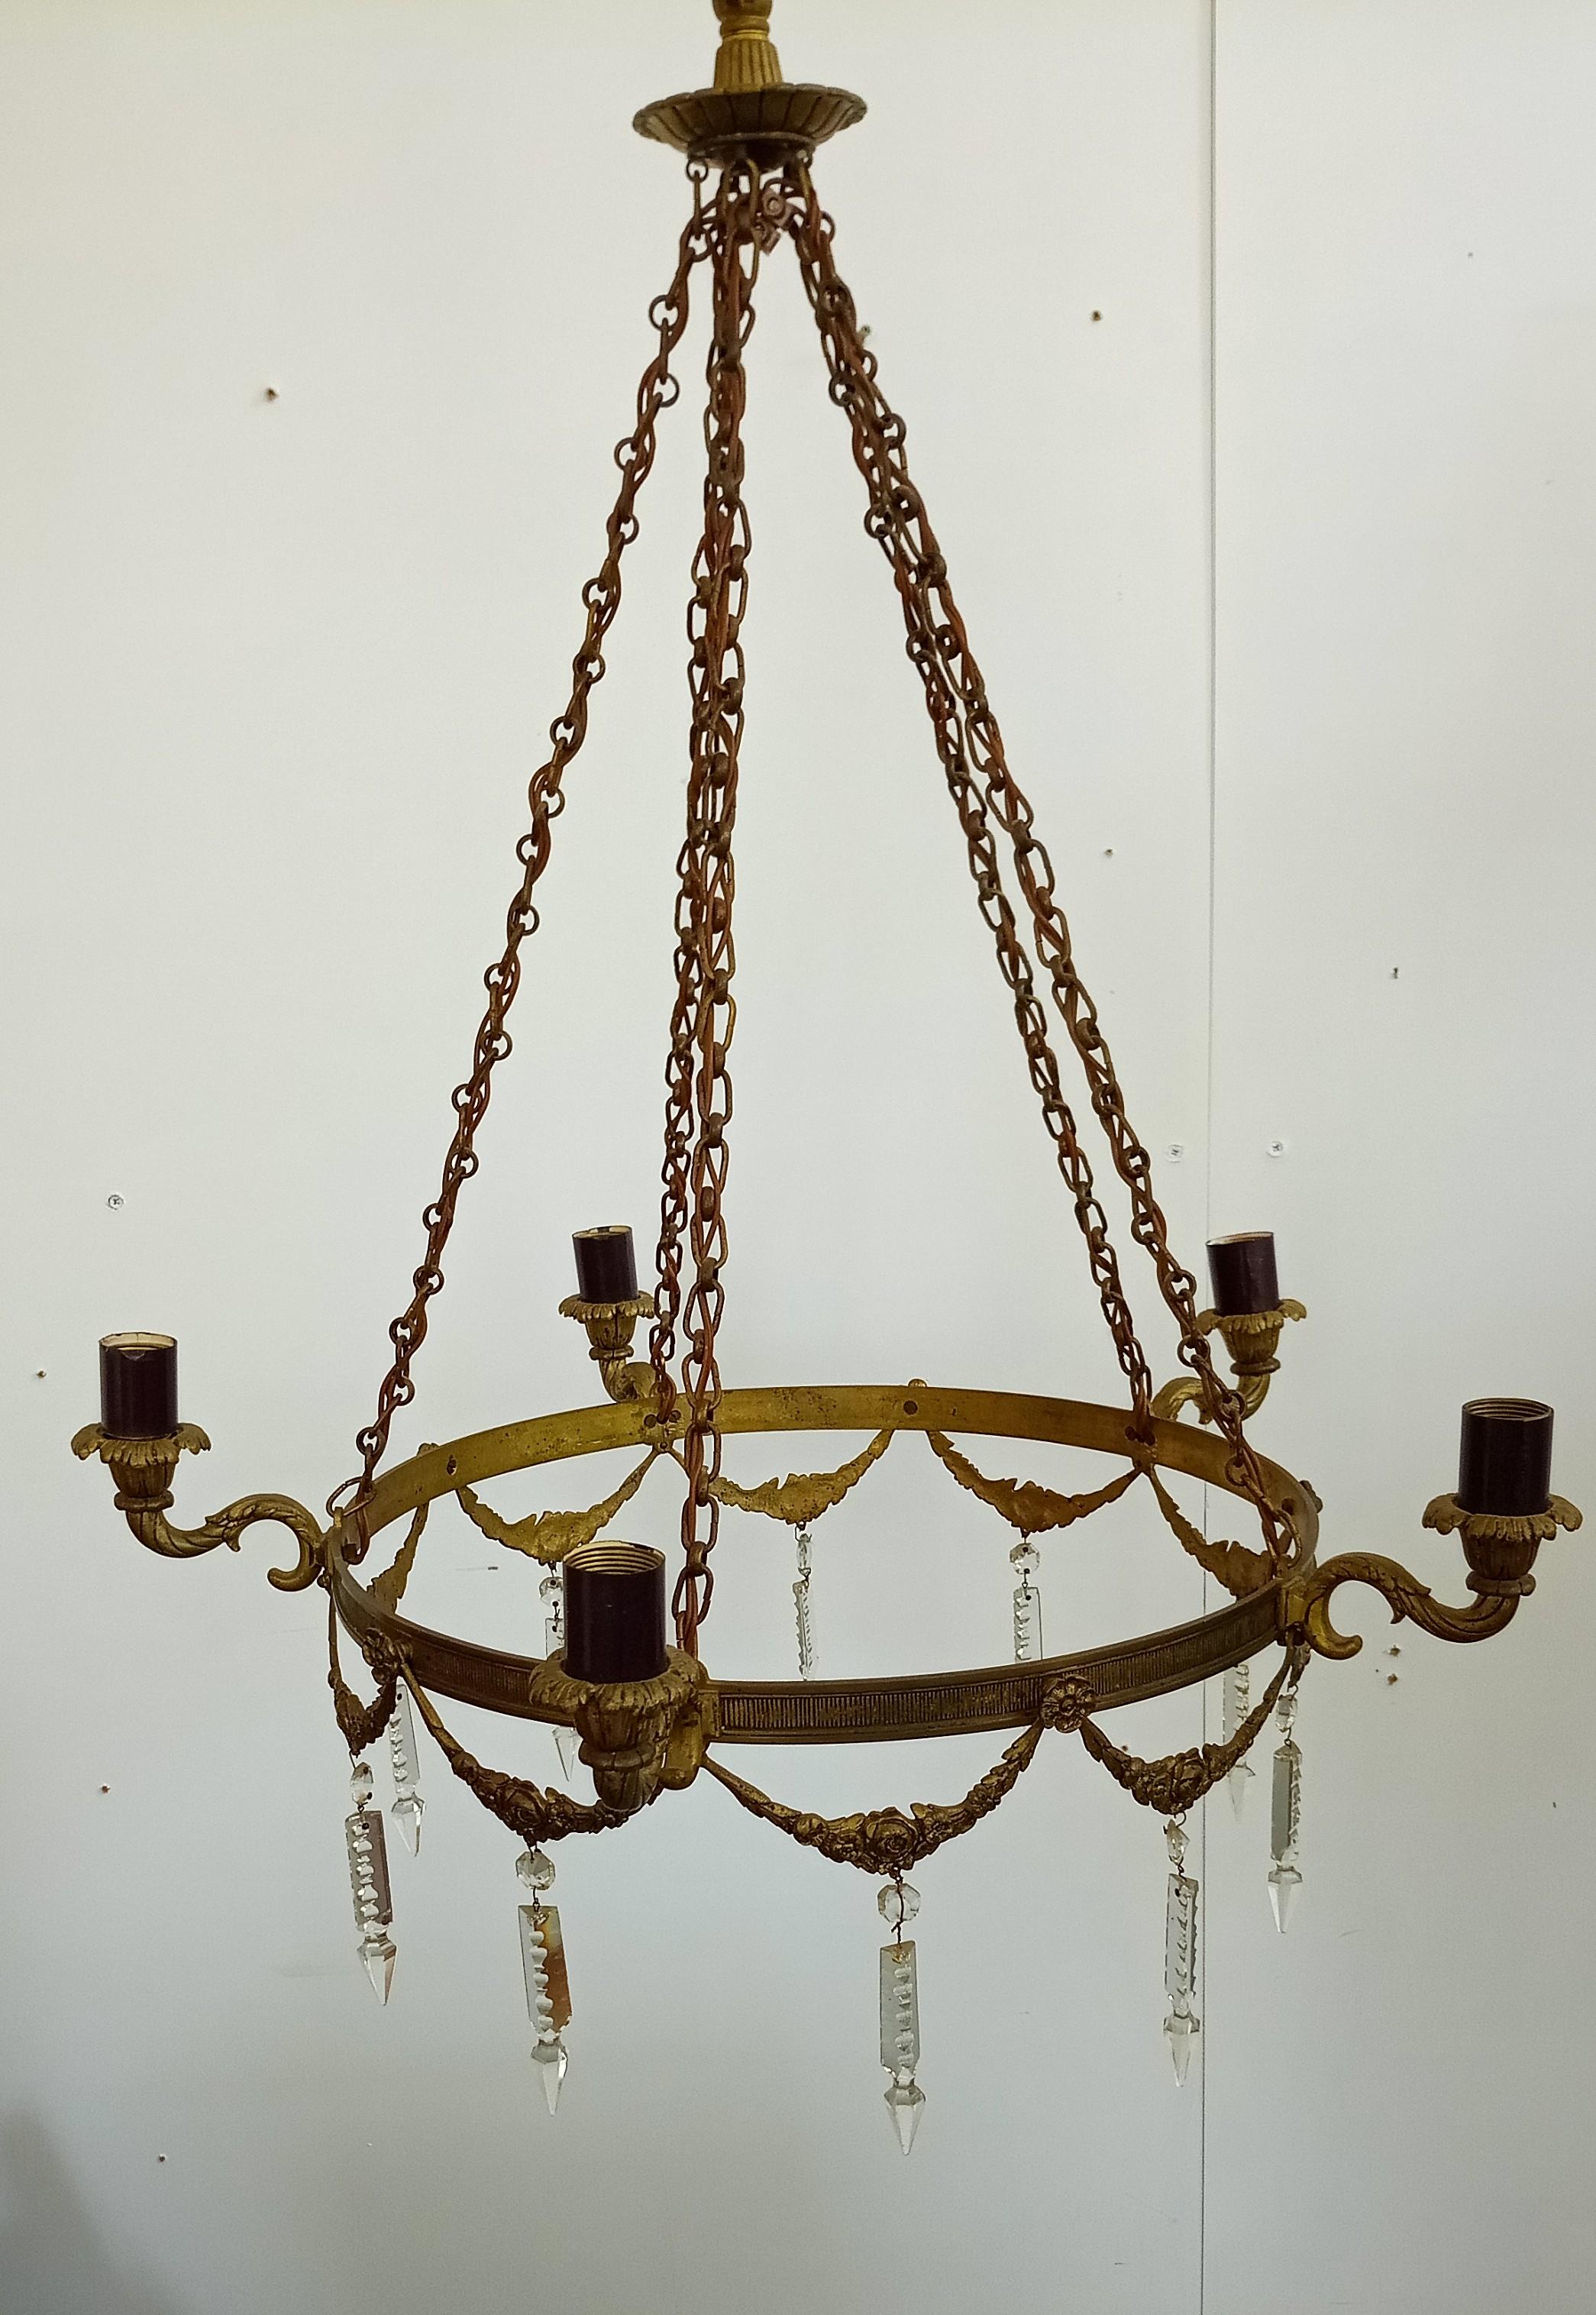 high decorative antique bronze candelier from the empire.
I guess the chandelier was electrified later .